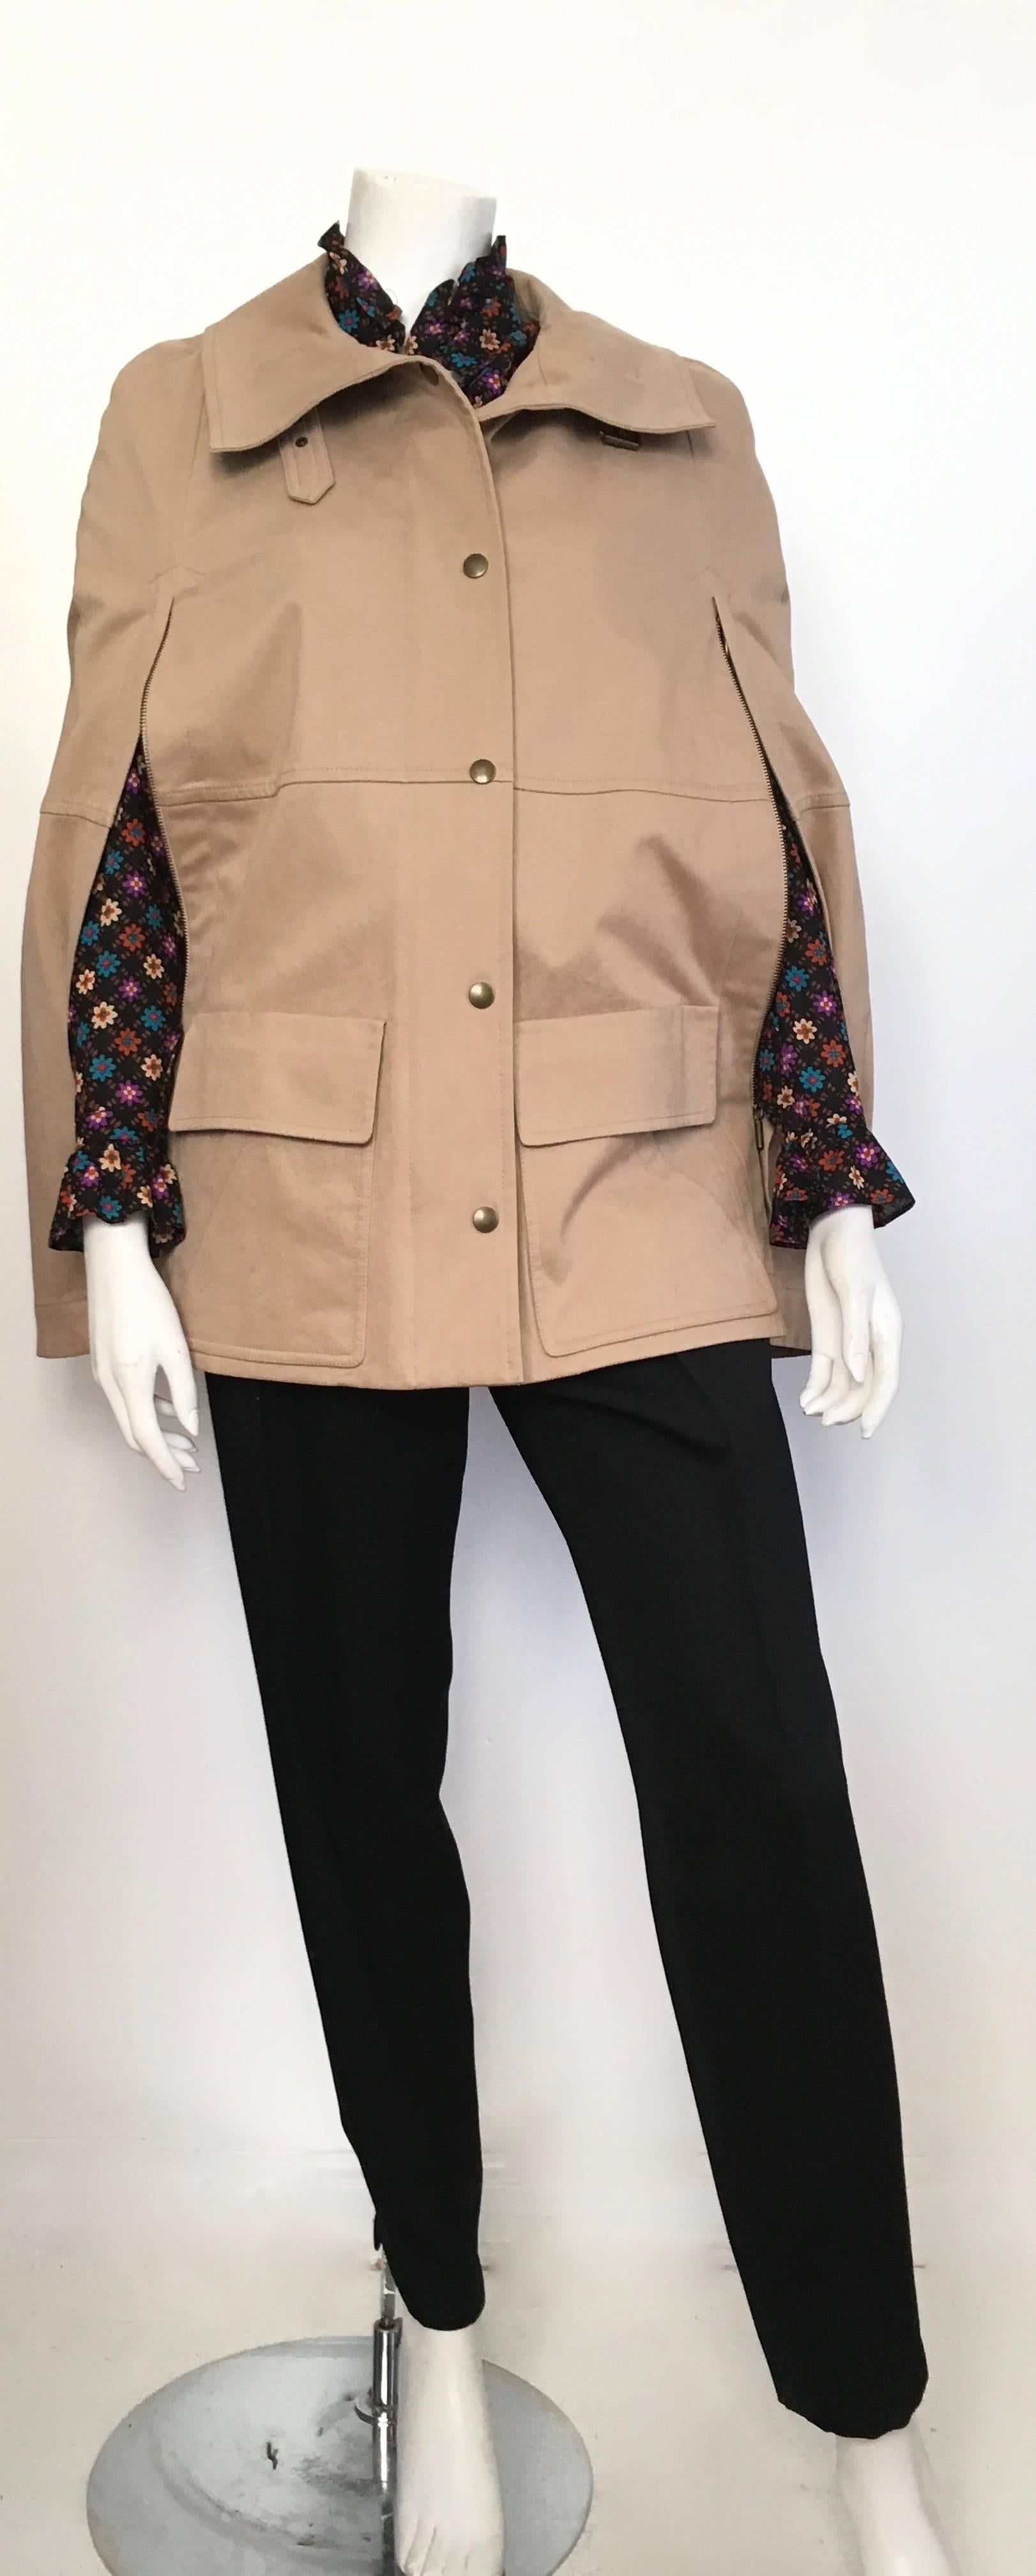 Akris punto khaki cotton snap button & zipper front safari cape size 6.  Both sides of cape has zipper to let your arms out.  There are pockets on front of cape. There is a buckle at collar that gives cape an extra touch of sophistication. Cape is